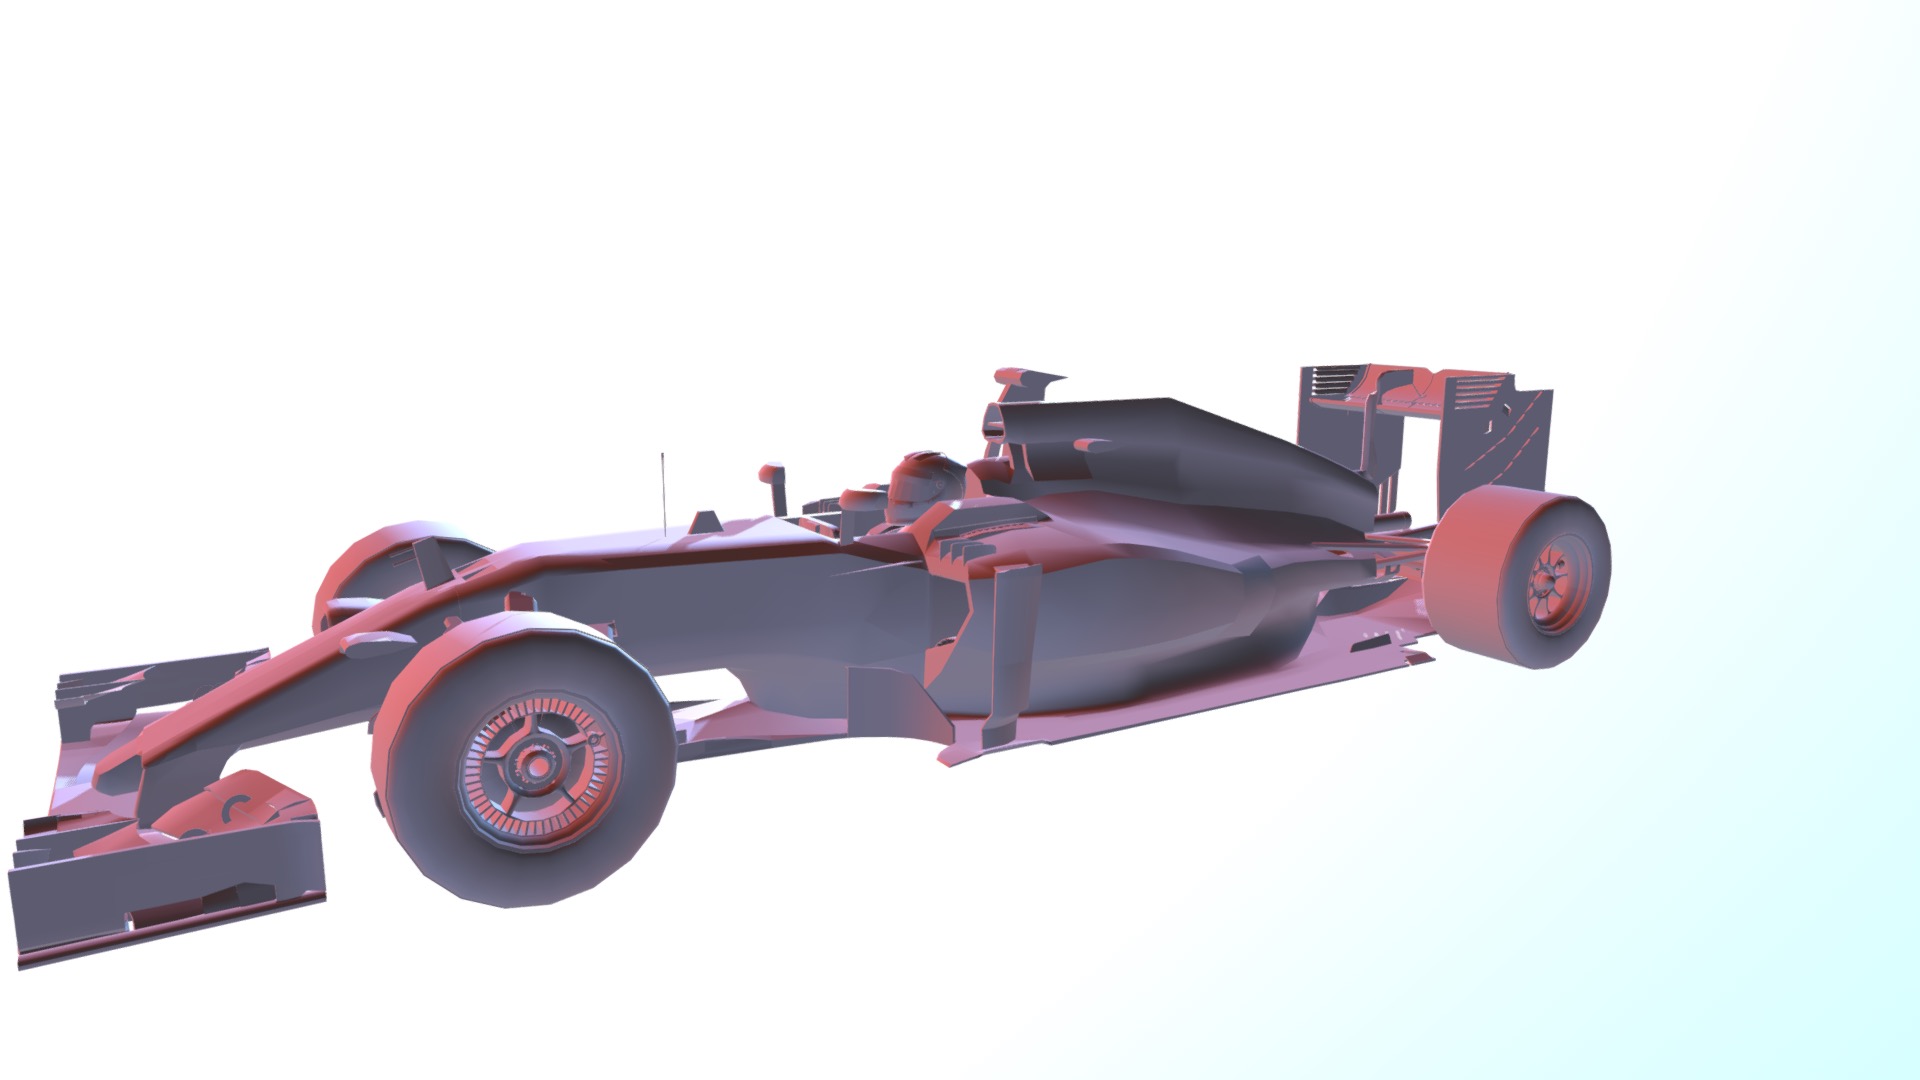 3D model MP4 30 - This is a 3D model of the MP4 30. The 3D model is about a red and black toy car.